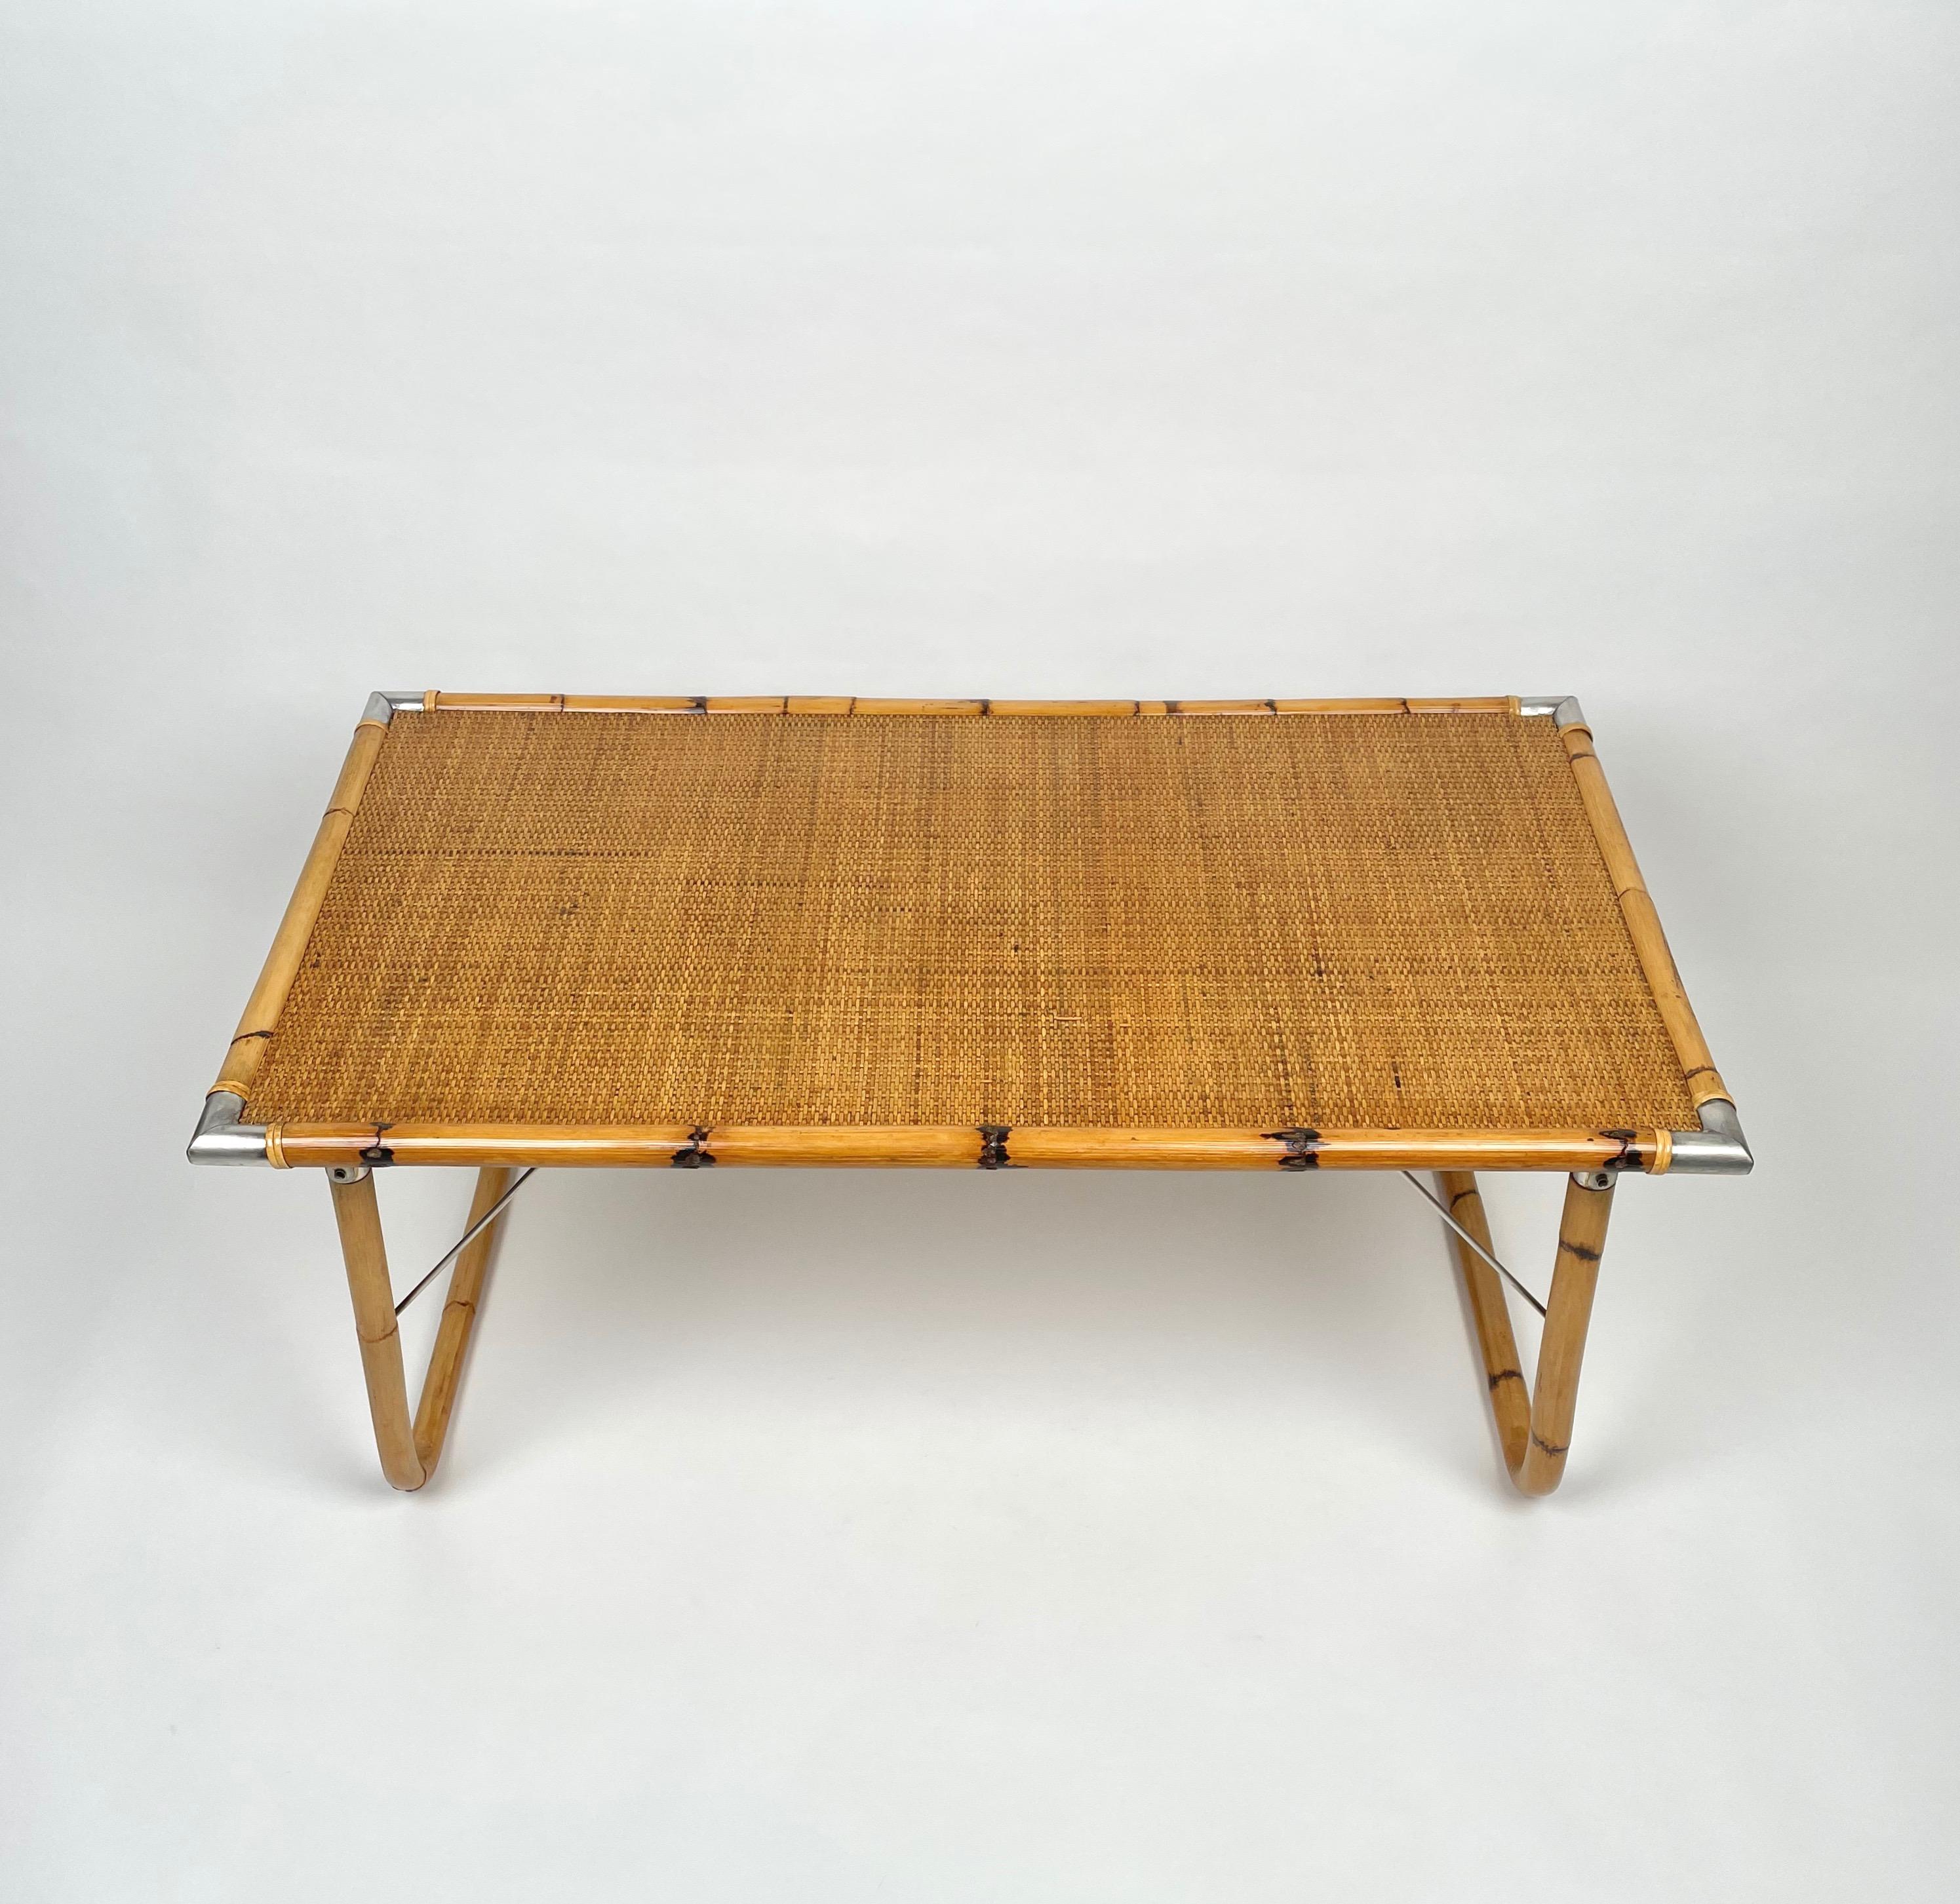 Folding coffee table in bamboo and Rattan with corners reinforced with steel.

Made in Italy 1970s.